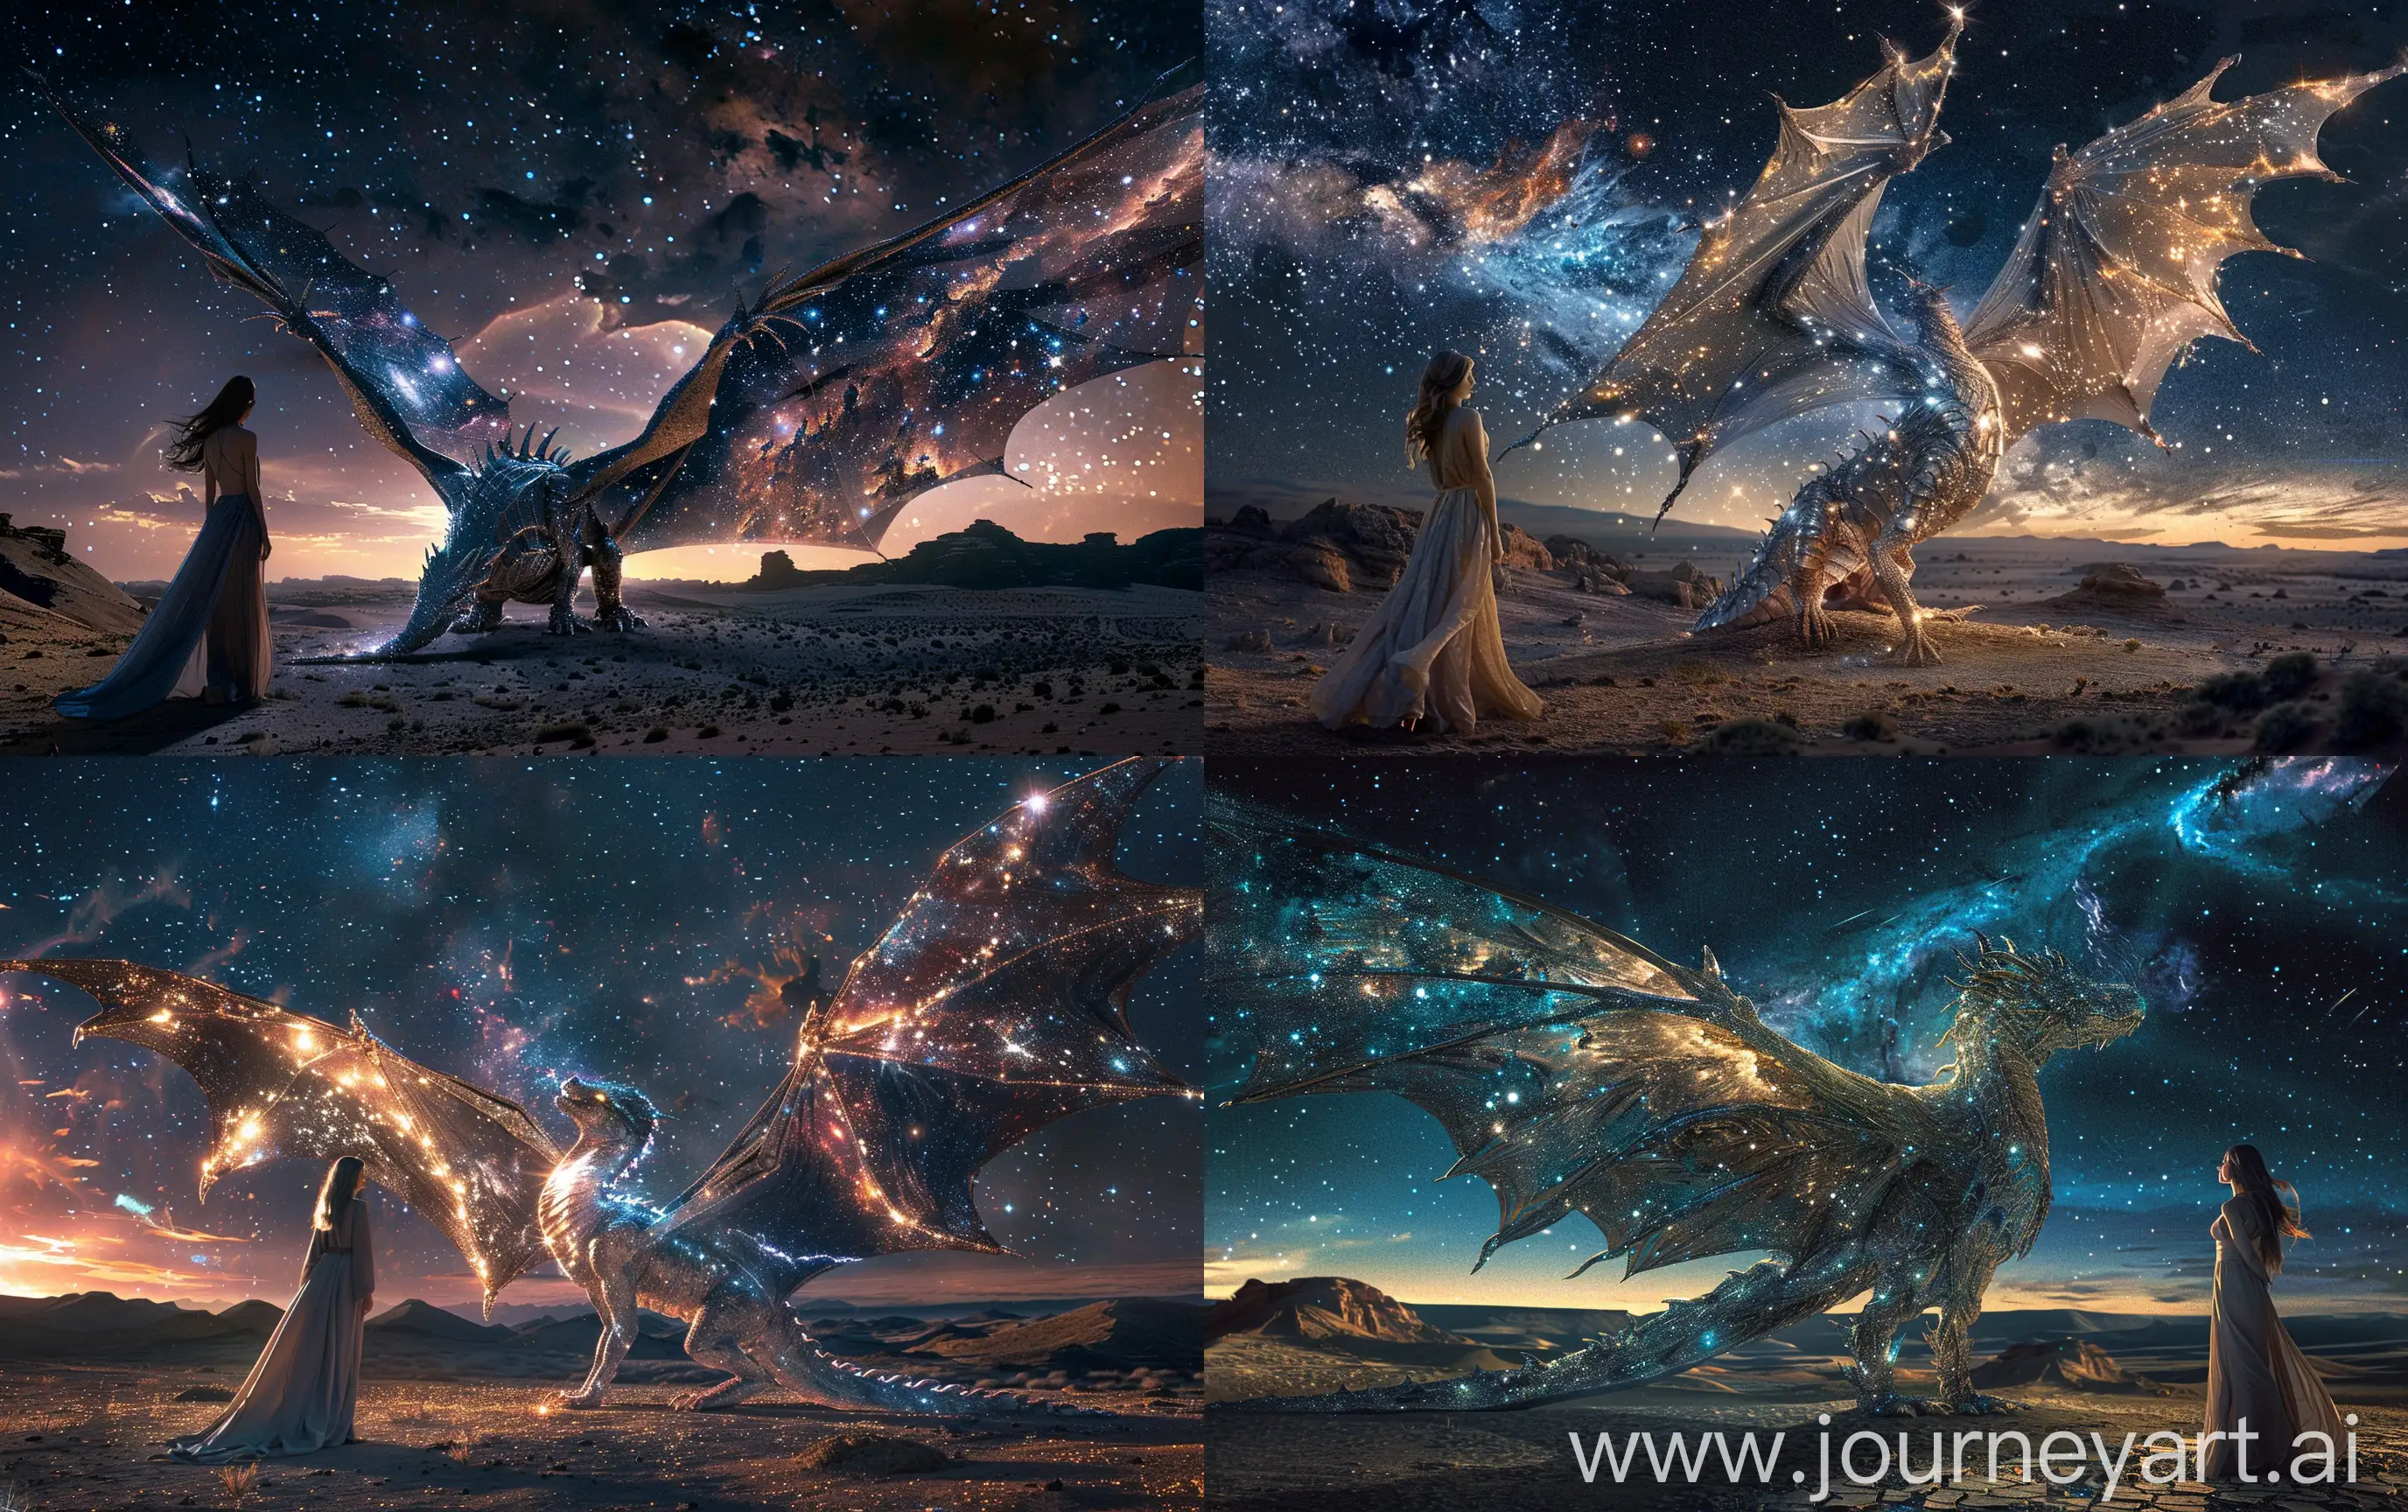 The giant winged dragon made of nebulas stands on ground, wings are made of shining galaxies and stars, beautiful woman in long dress looks at the dragon, the night dark desert with small hills, in the sky is deep space with bright nebulas, realistic --ar 16:10